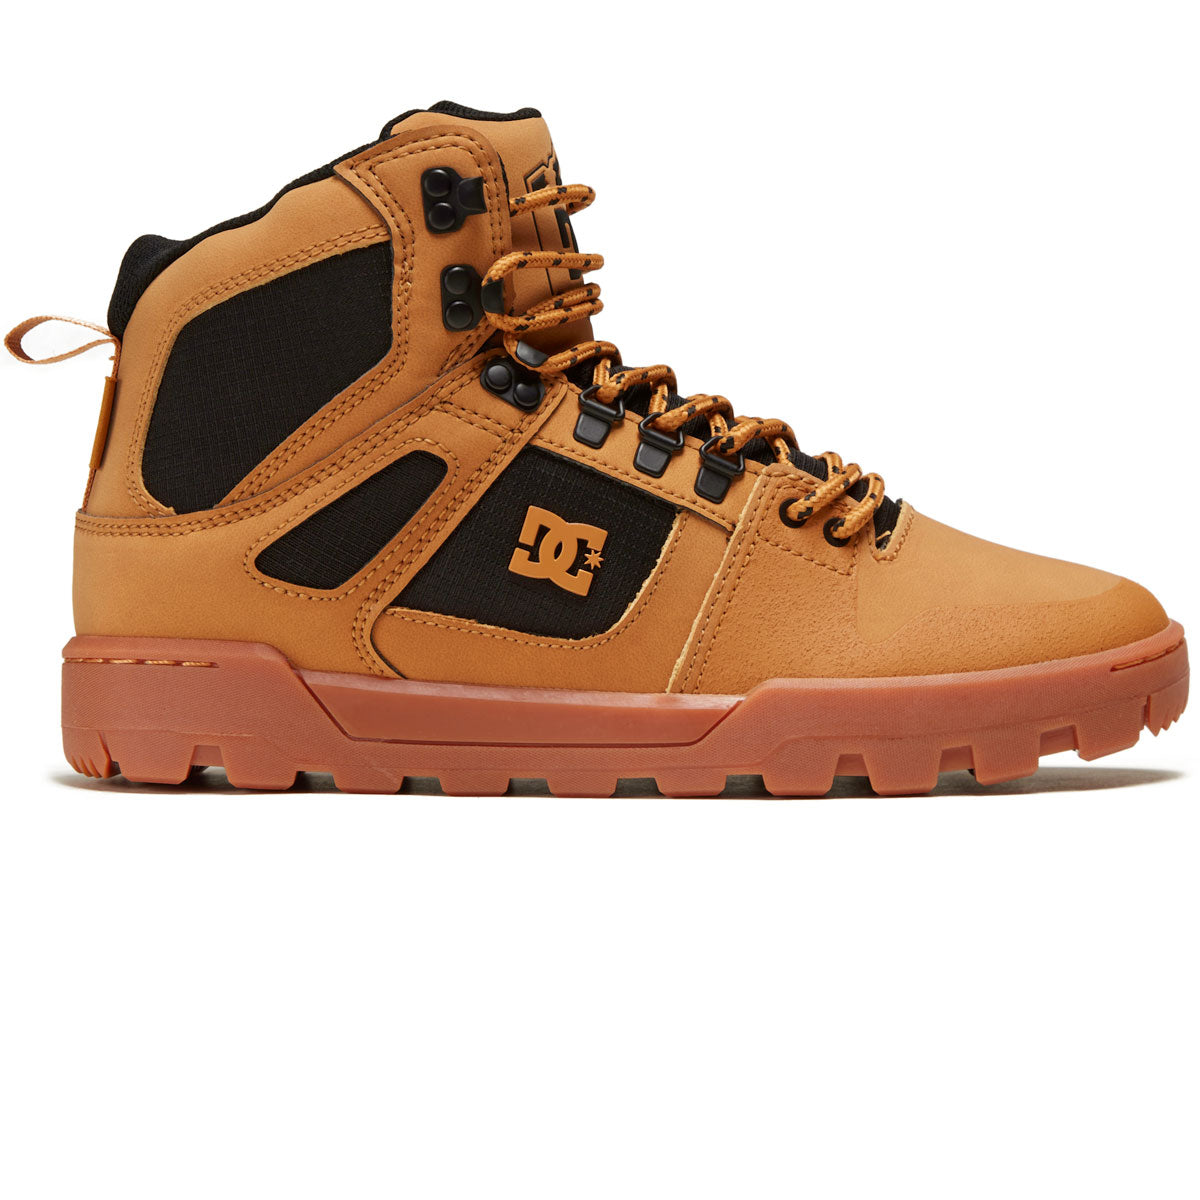 DC Pure High-top Wr Boots - Wheat/Black image 1